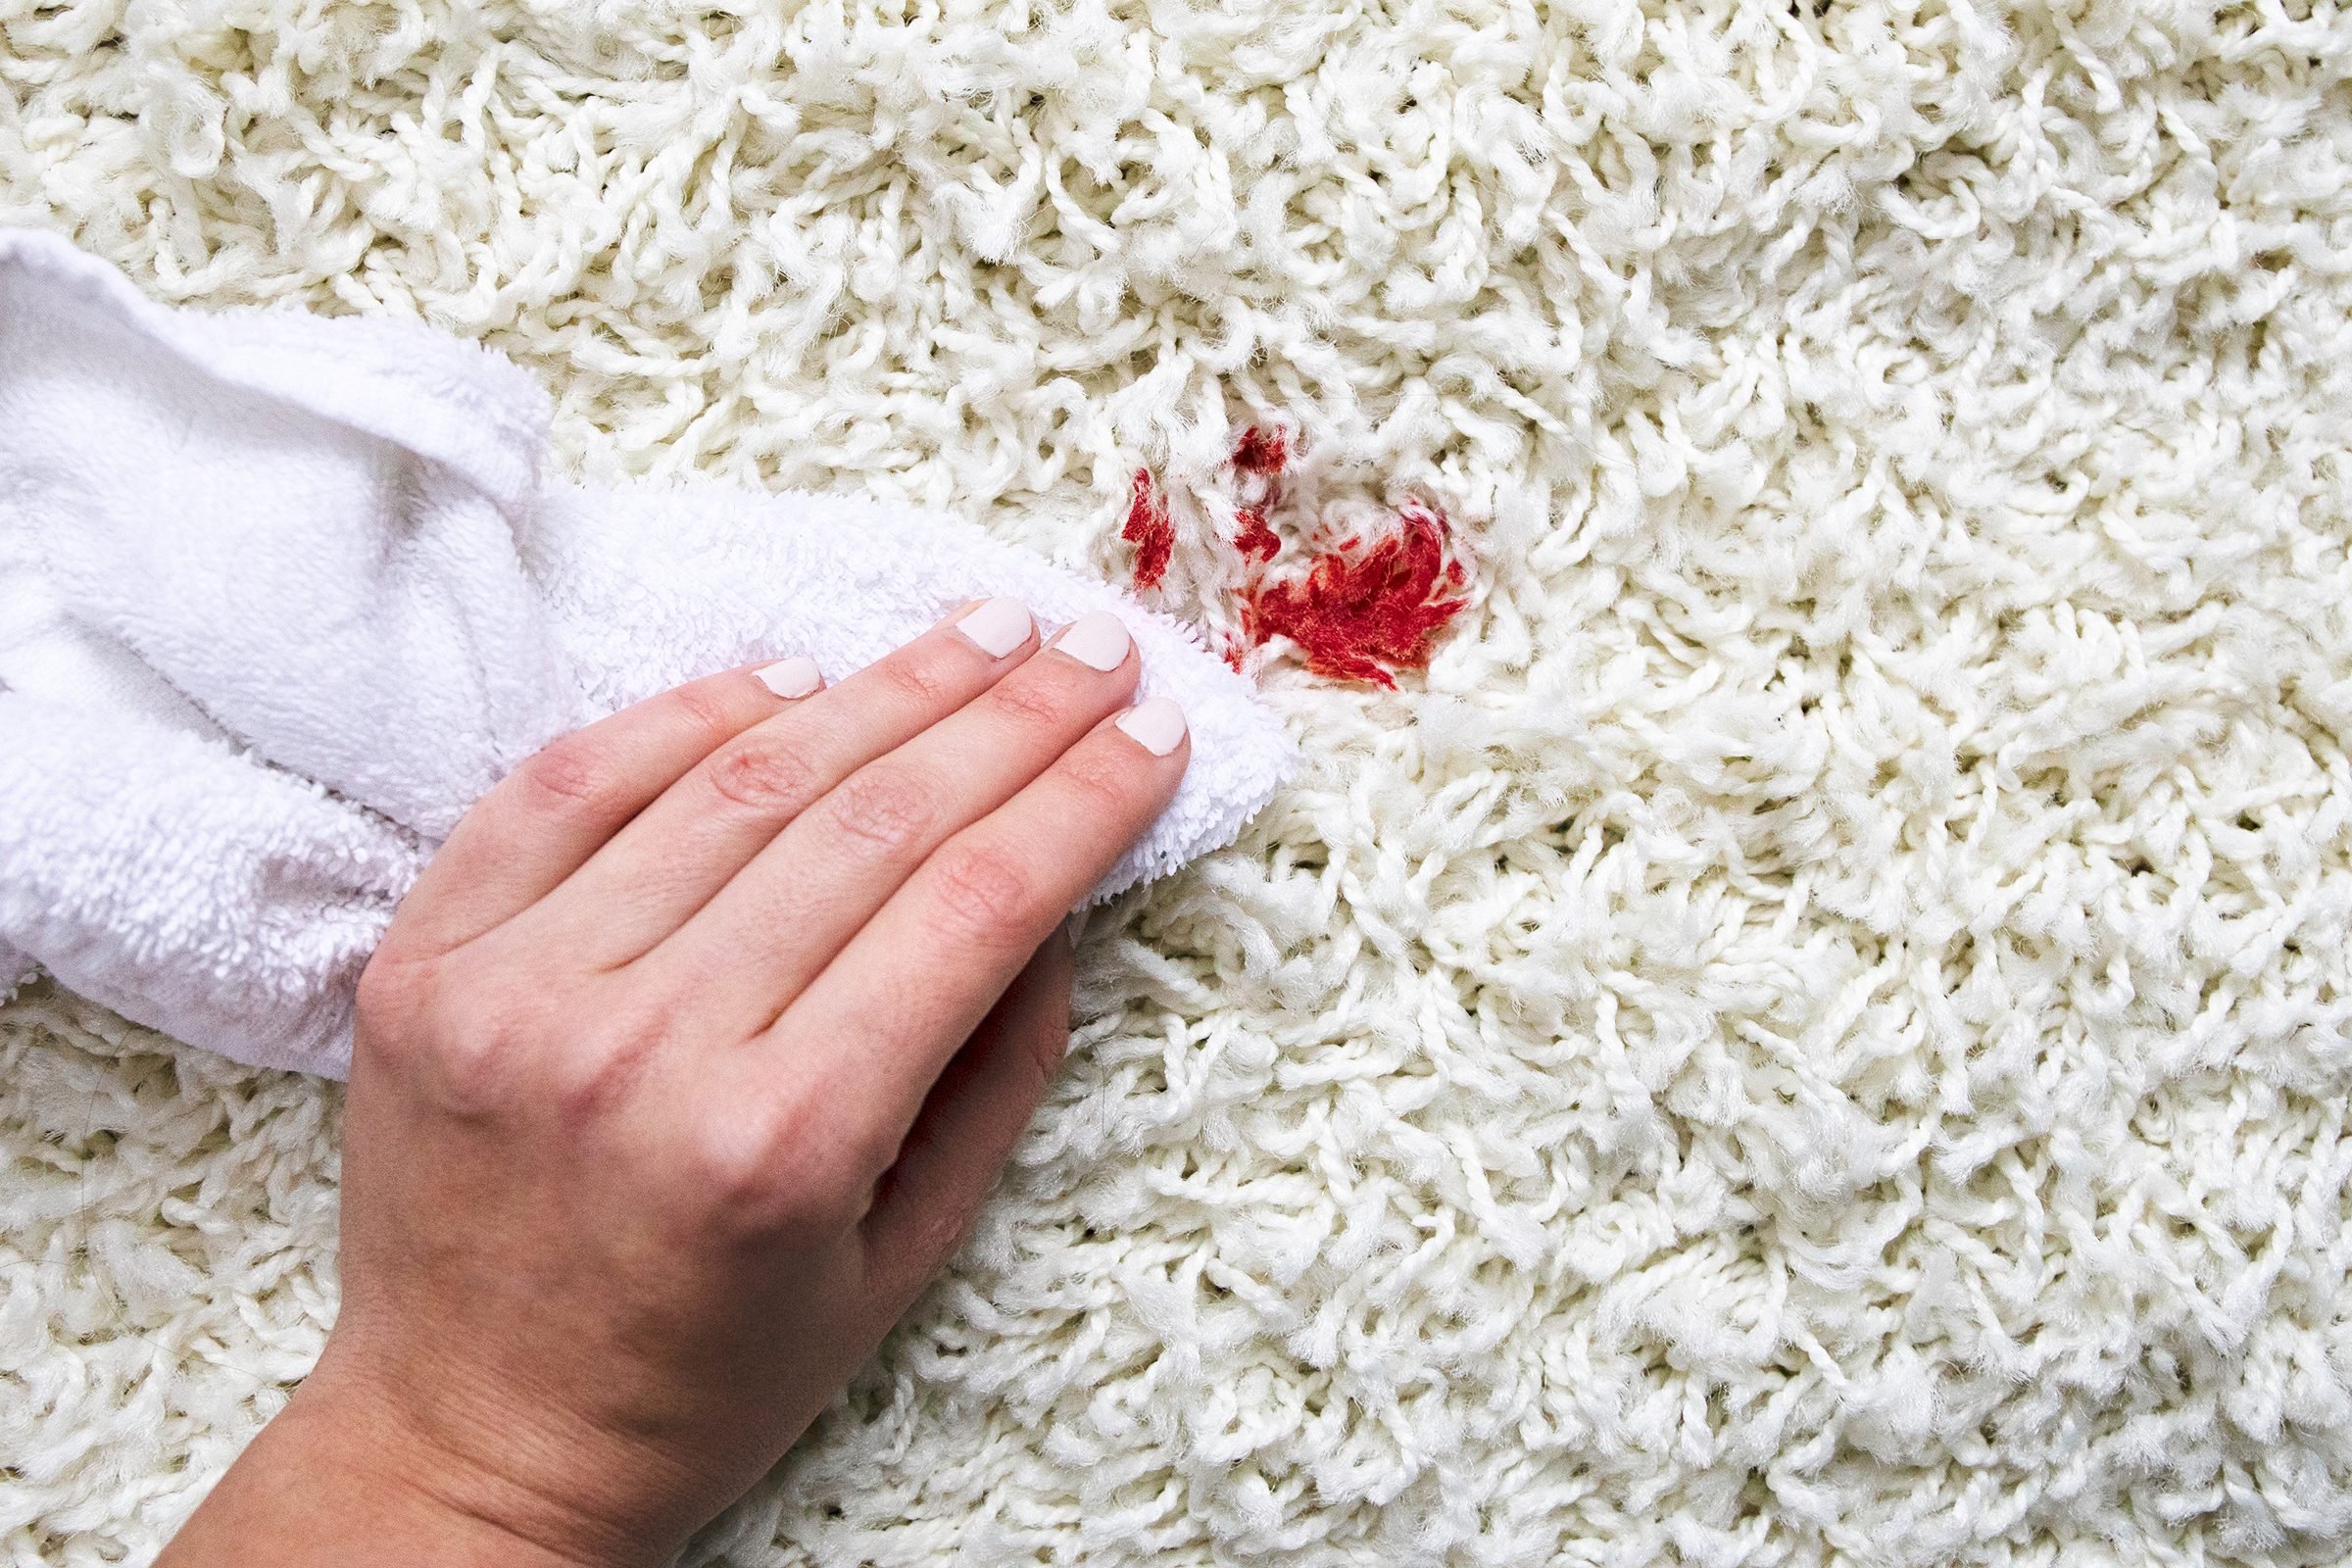 How To Get Blood Out Of Carpet 6